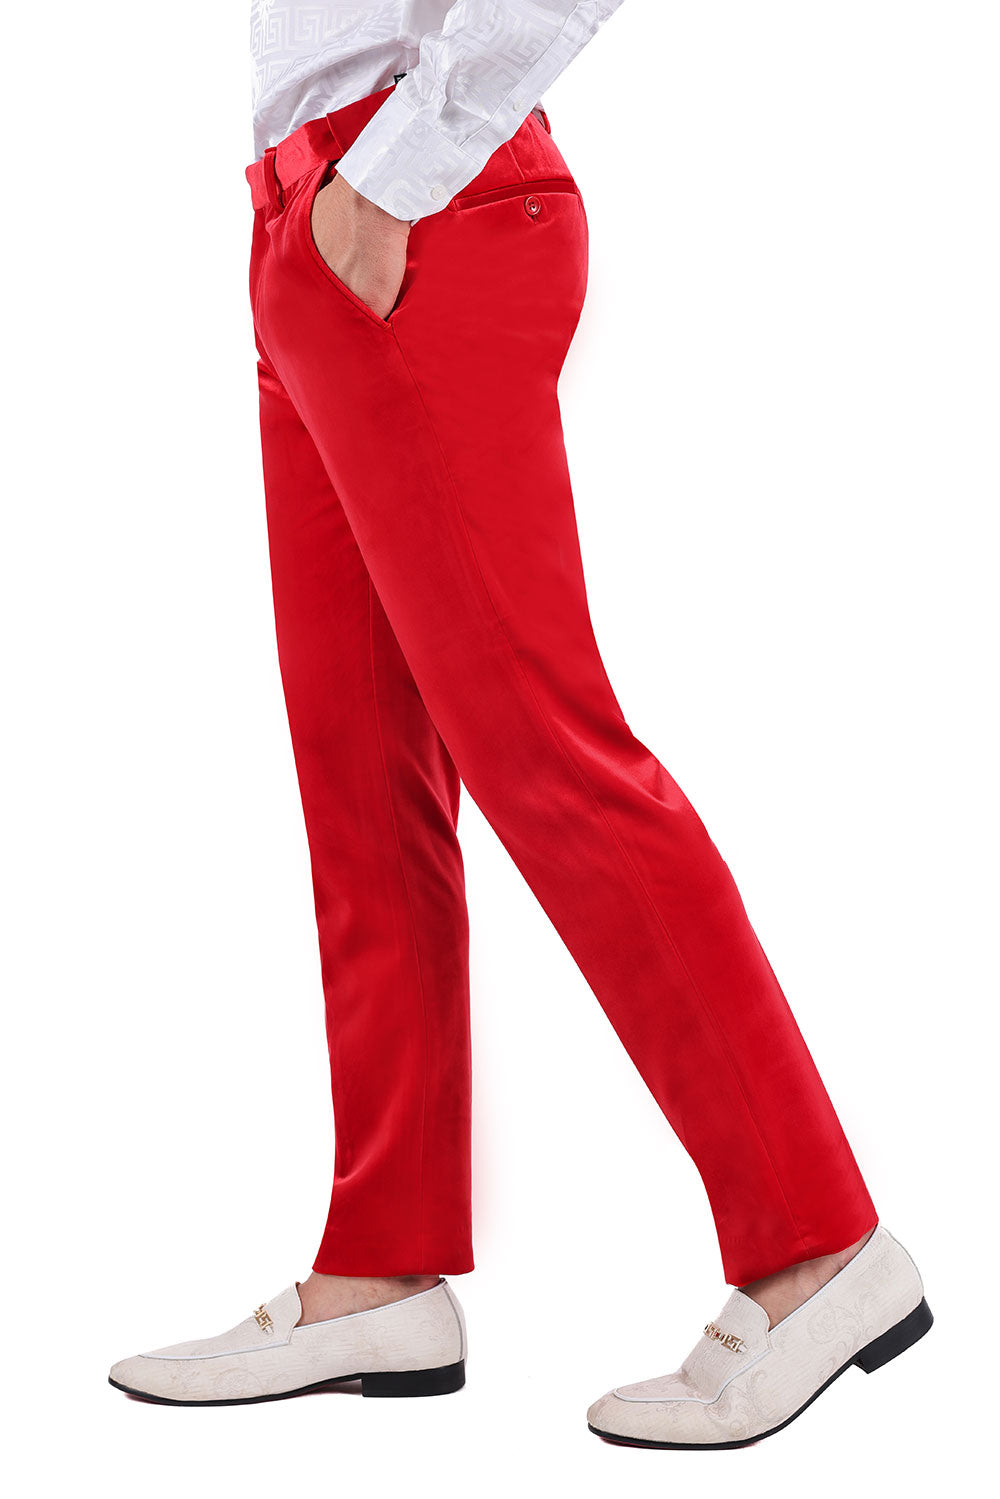 Barabas Men's Velvet Shiny Chino Solid Color Dress Pants 3CP06 Red